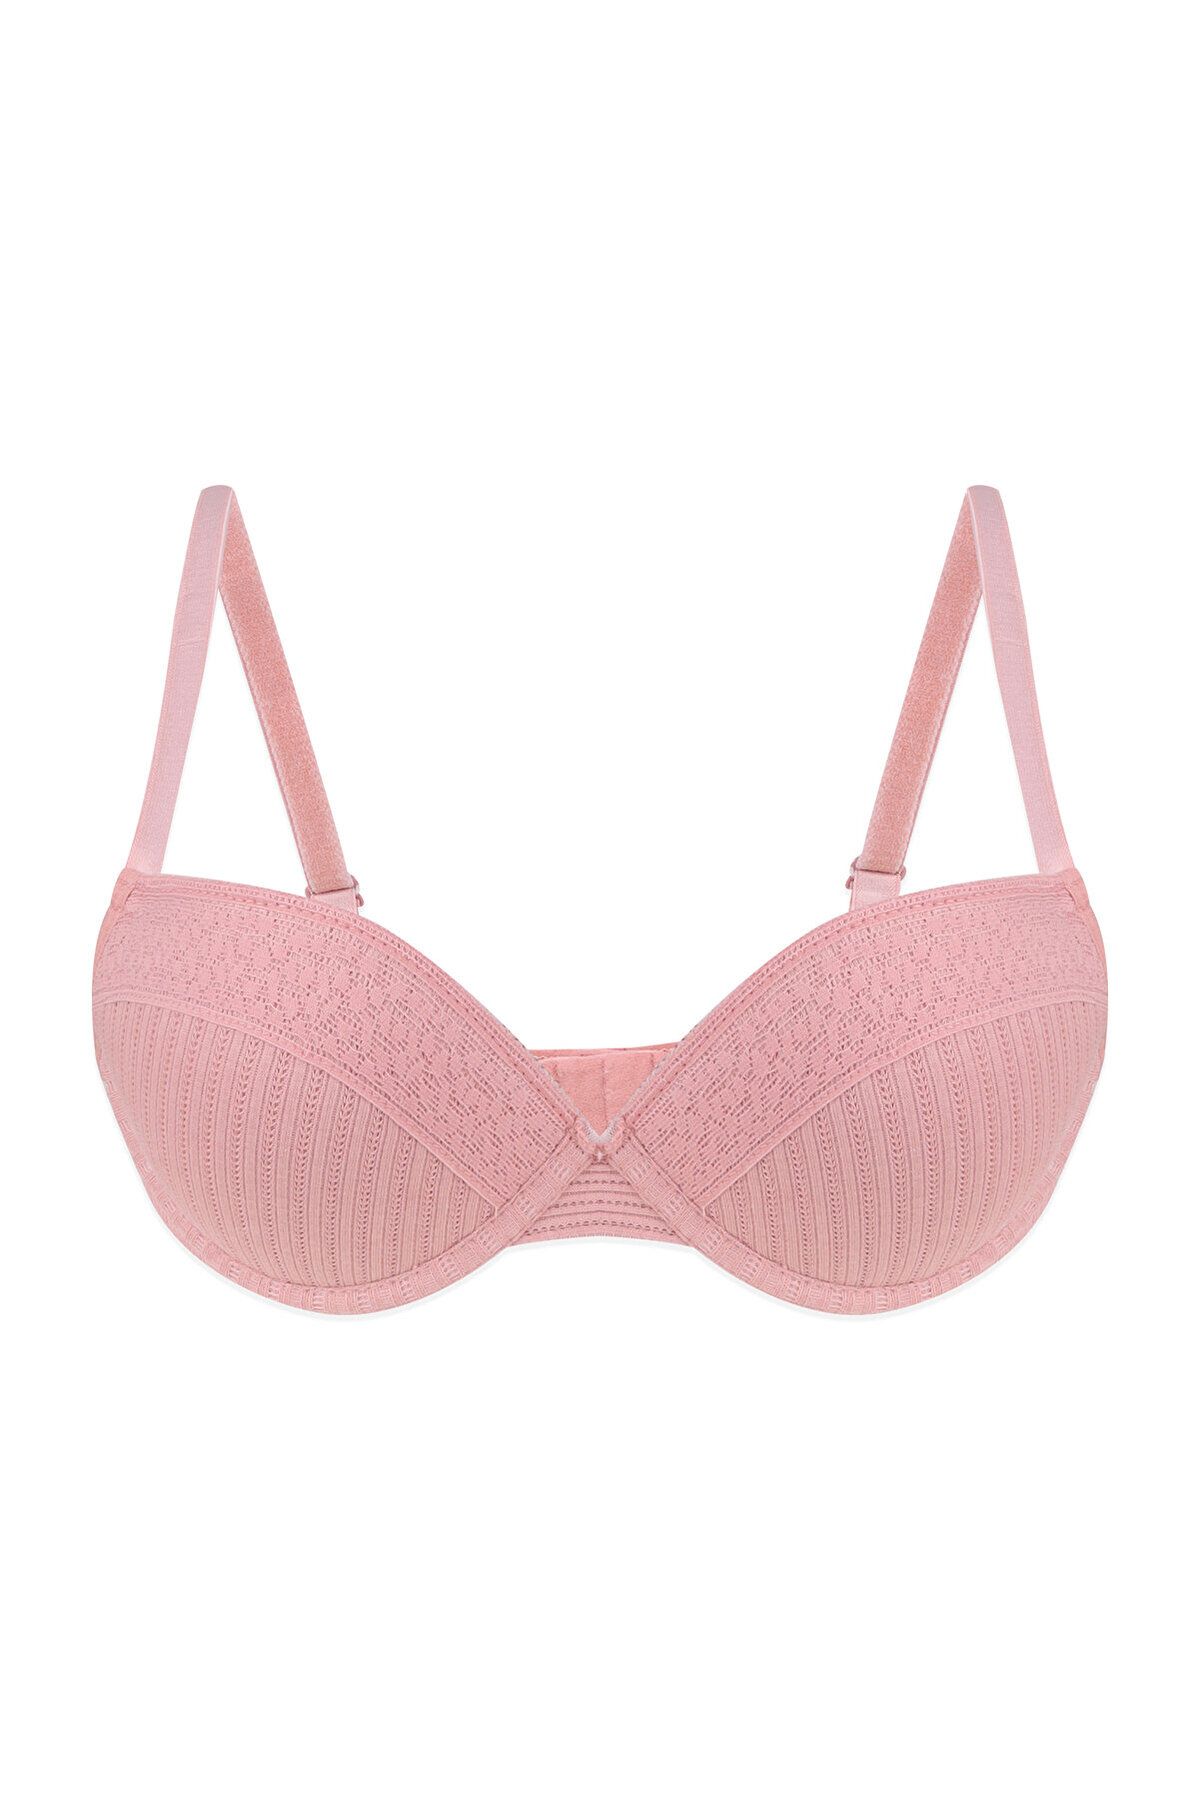 Yours lace padded bra in hot pink